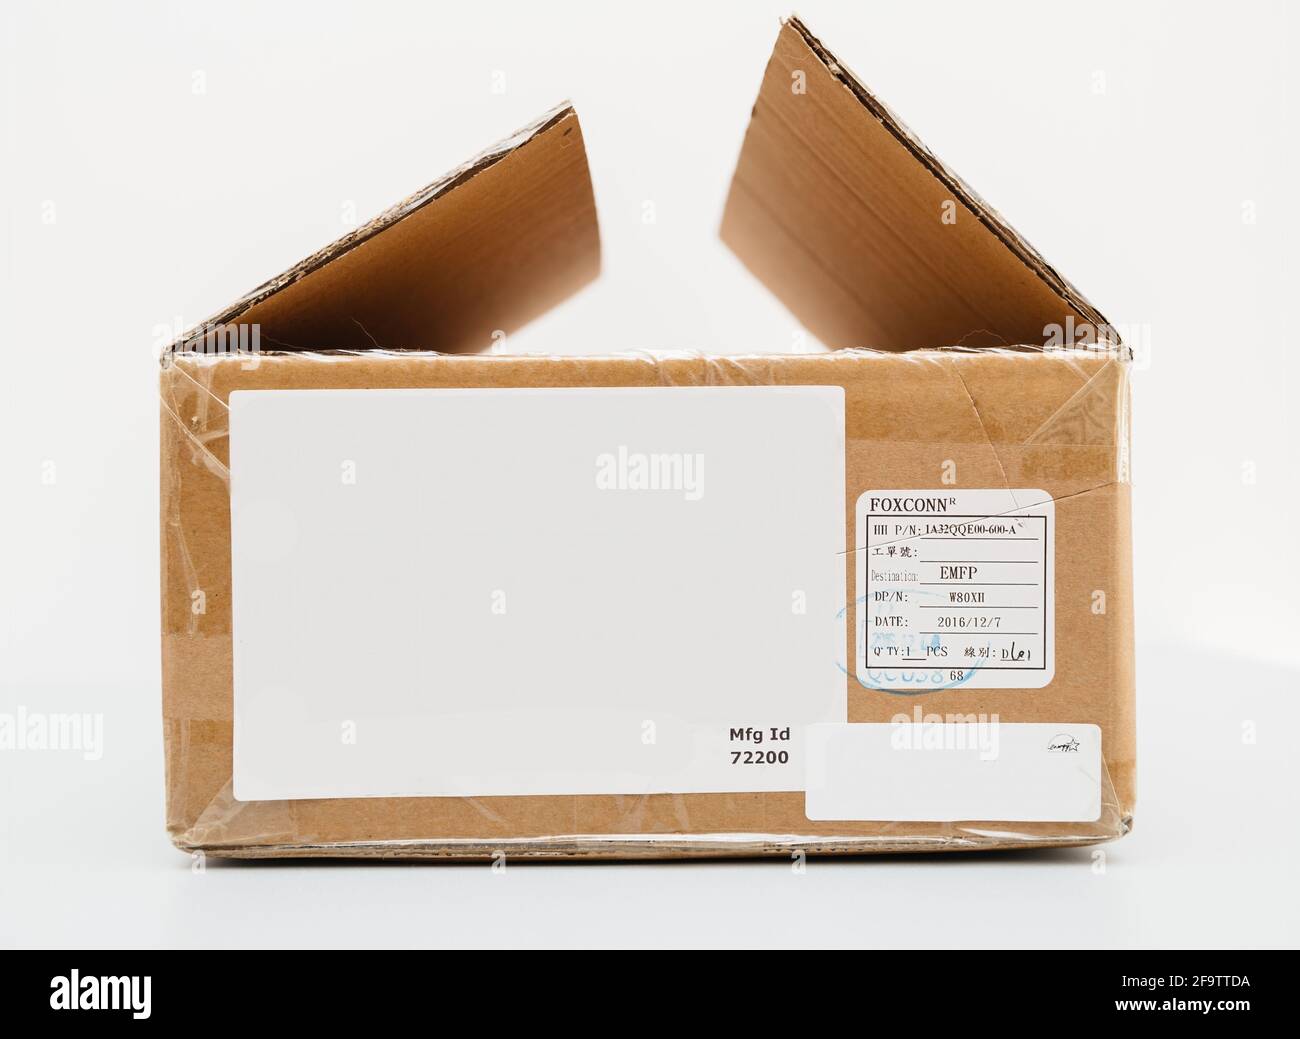 ide view of Foaxconn cardboard parcel with spare parts for Workstation Stock Photo